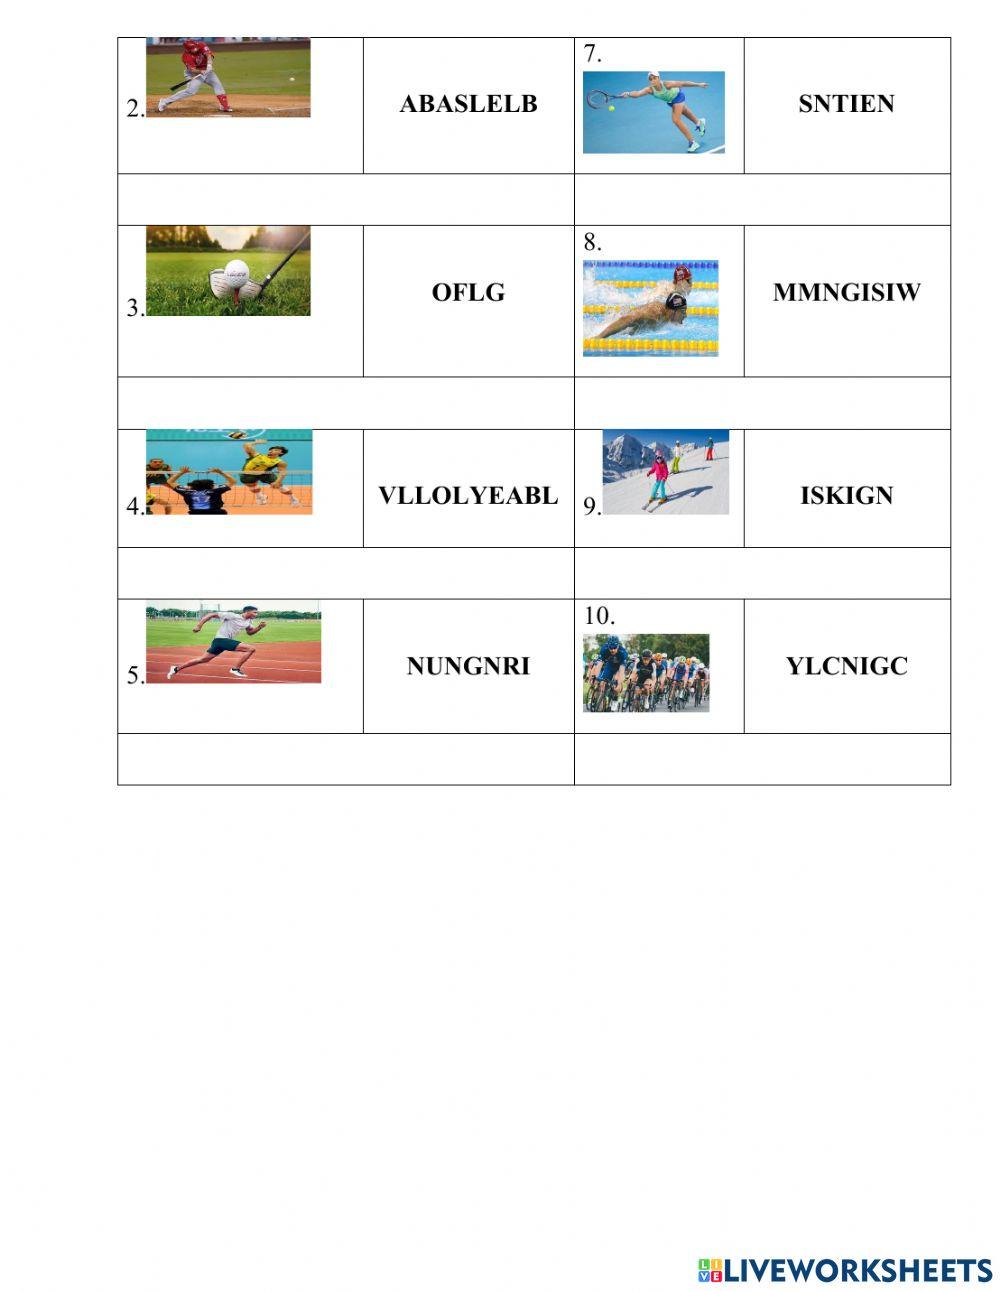 English 6 - vocab unit 8 sports and games